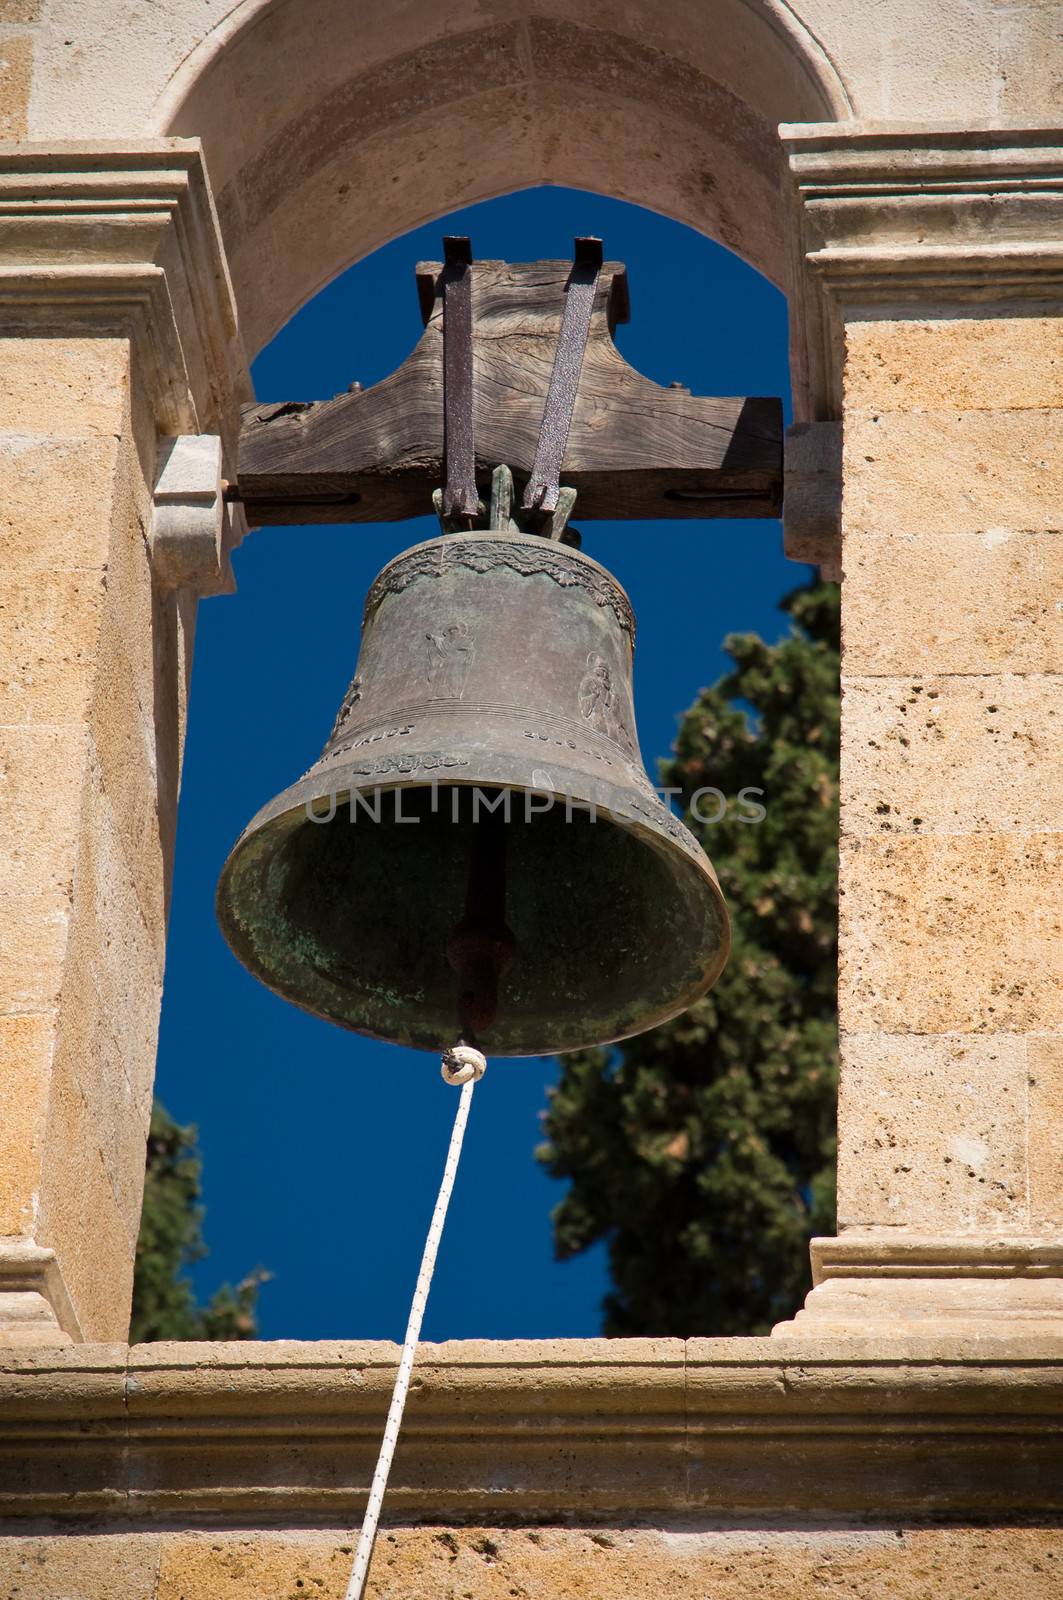 The bell of the old Greek Orthodox monastery on the island of Crete.